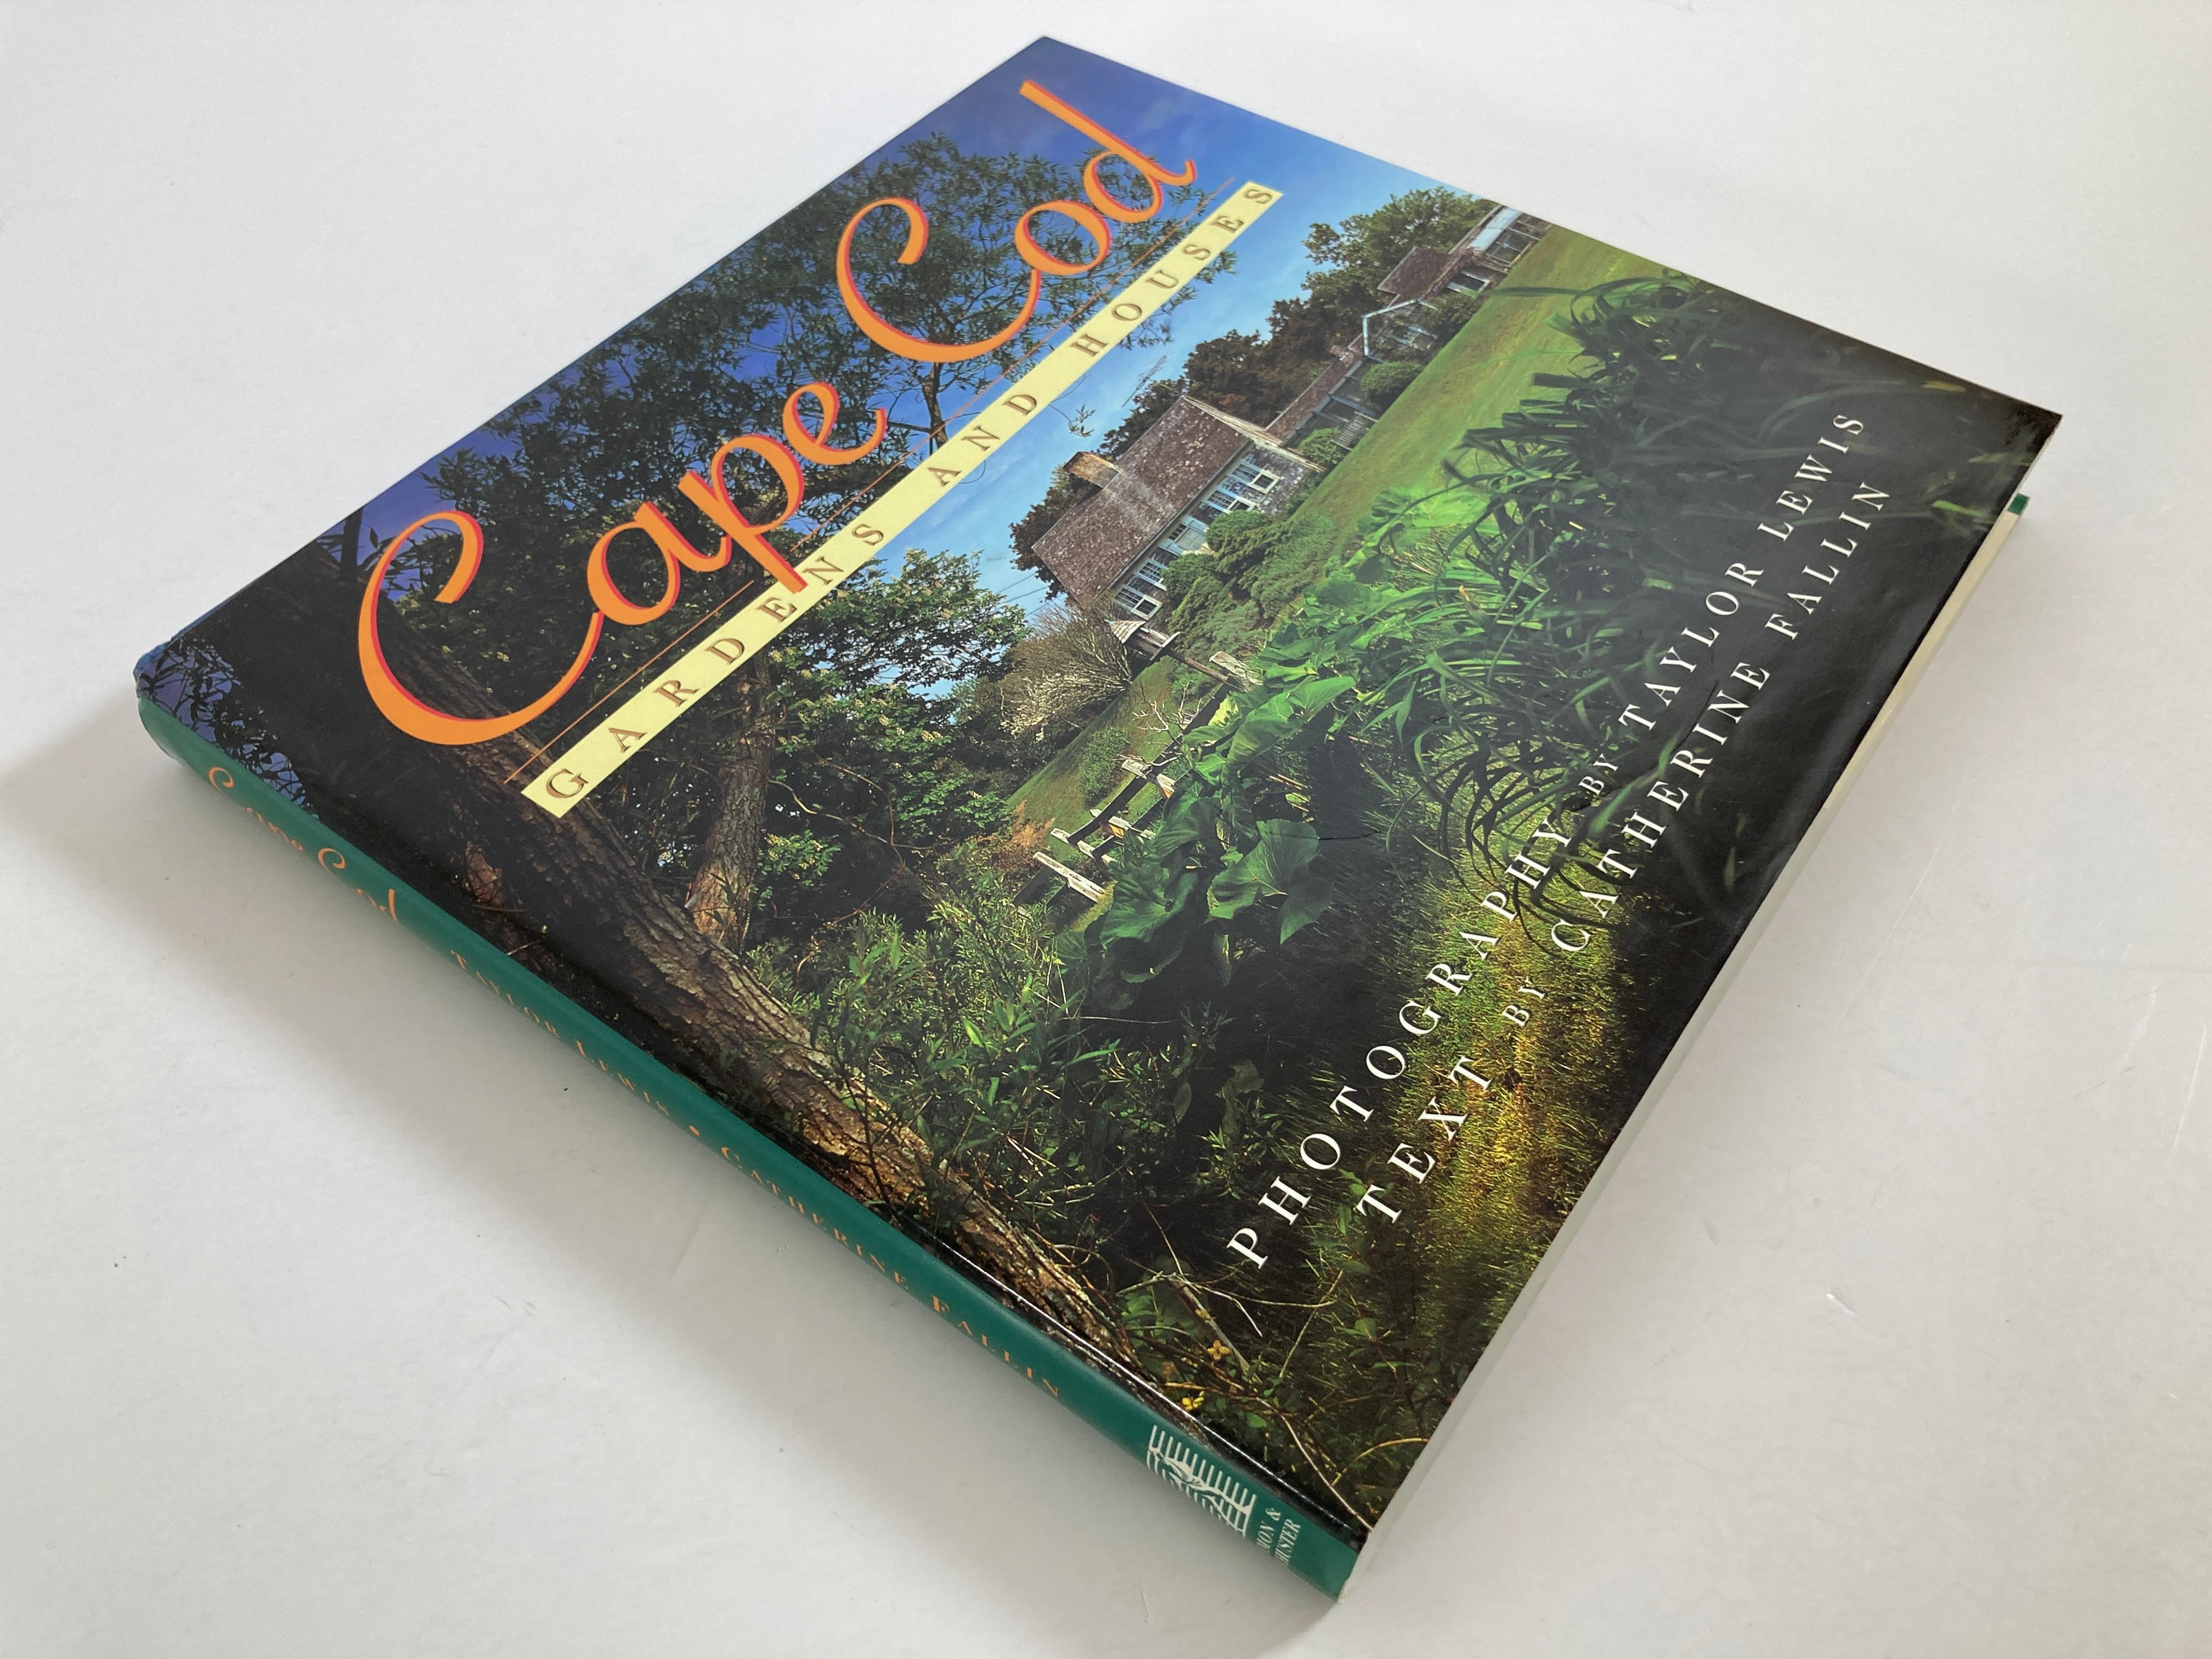 Cape Cod Gardens and Houses by Catherine Fallin Taylor Lewis Hardcover Book 4